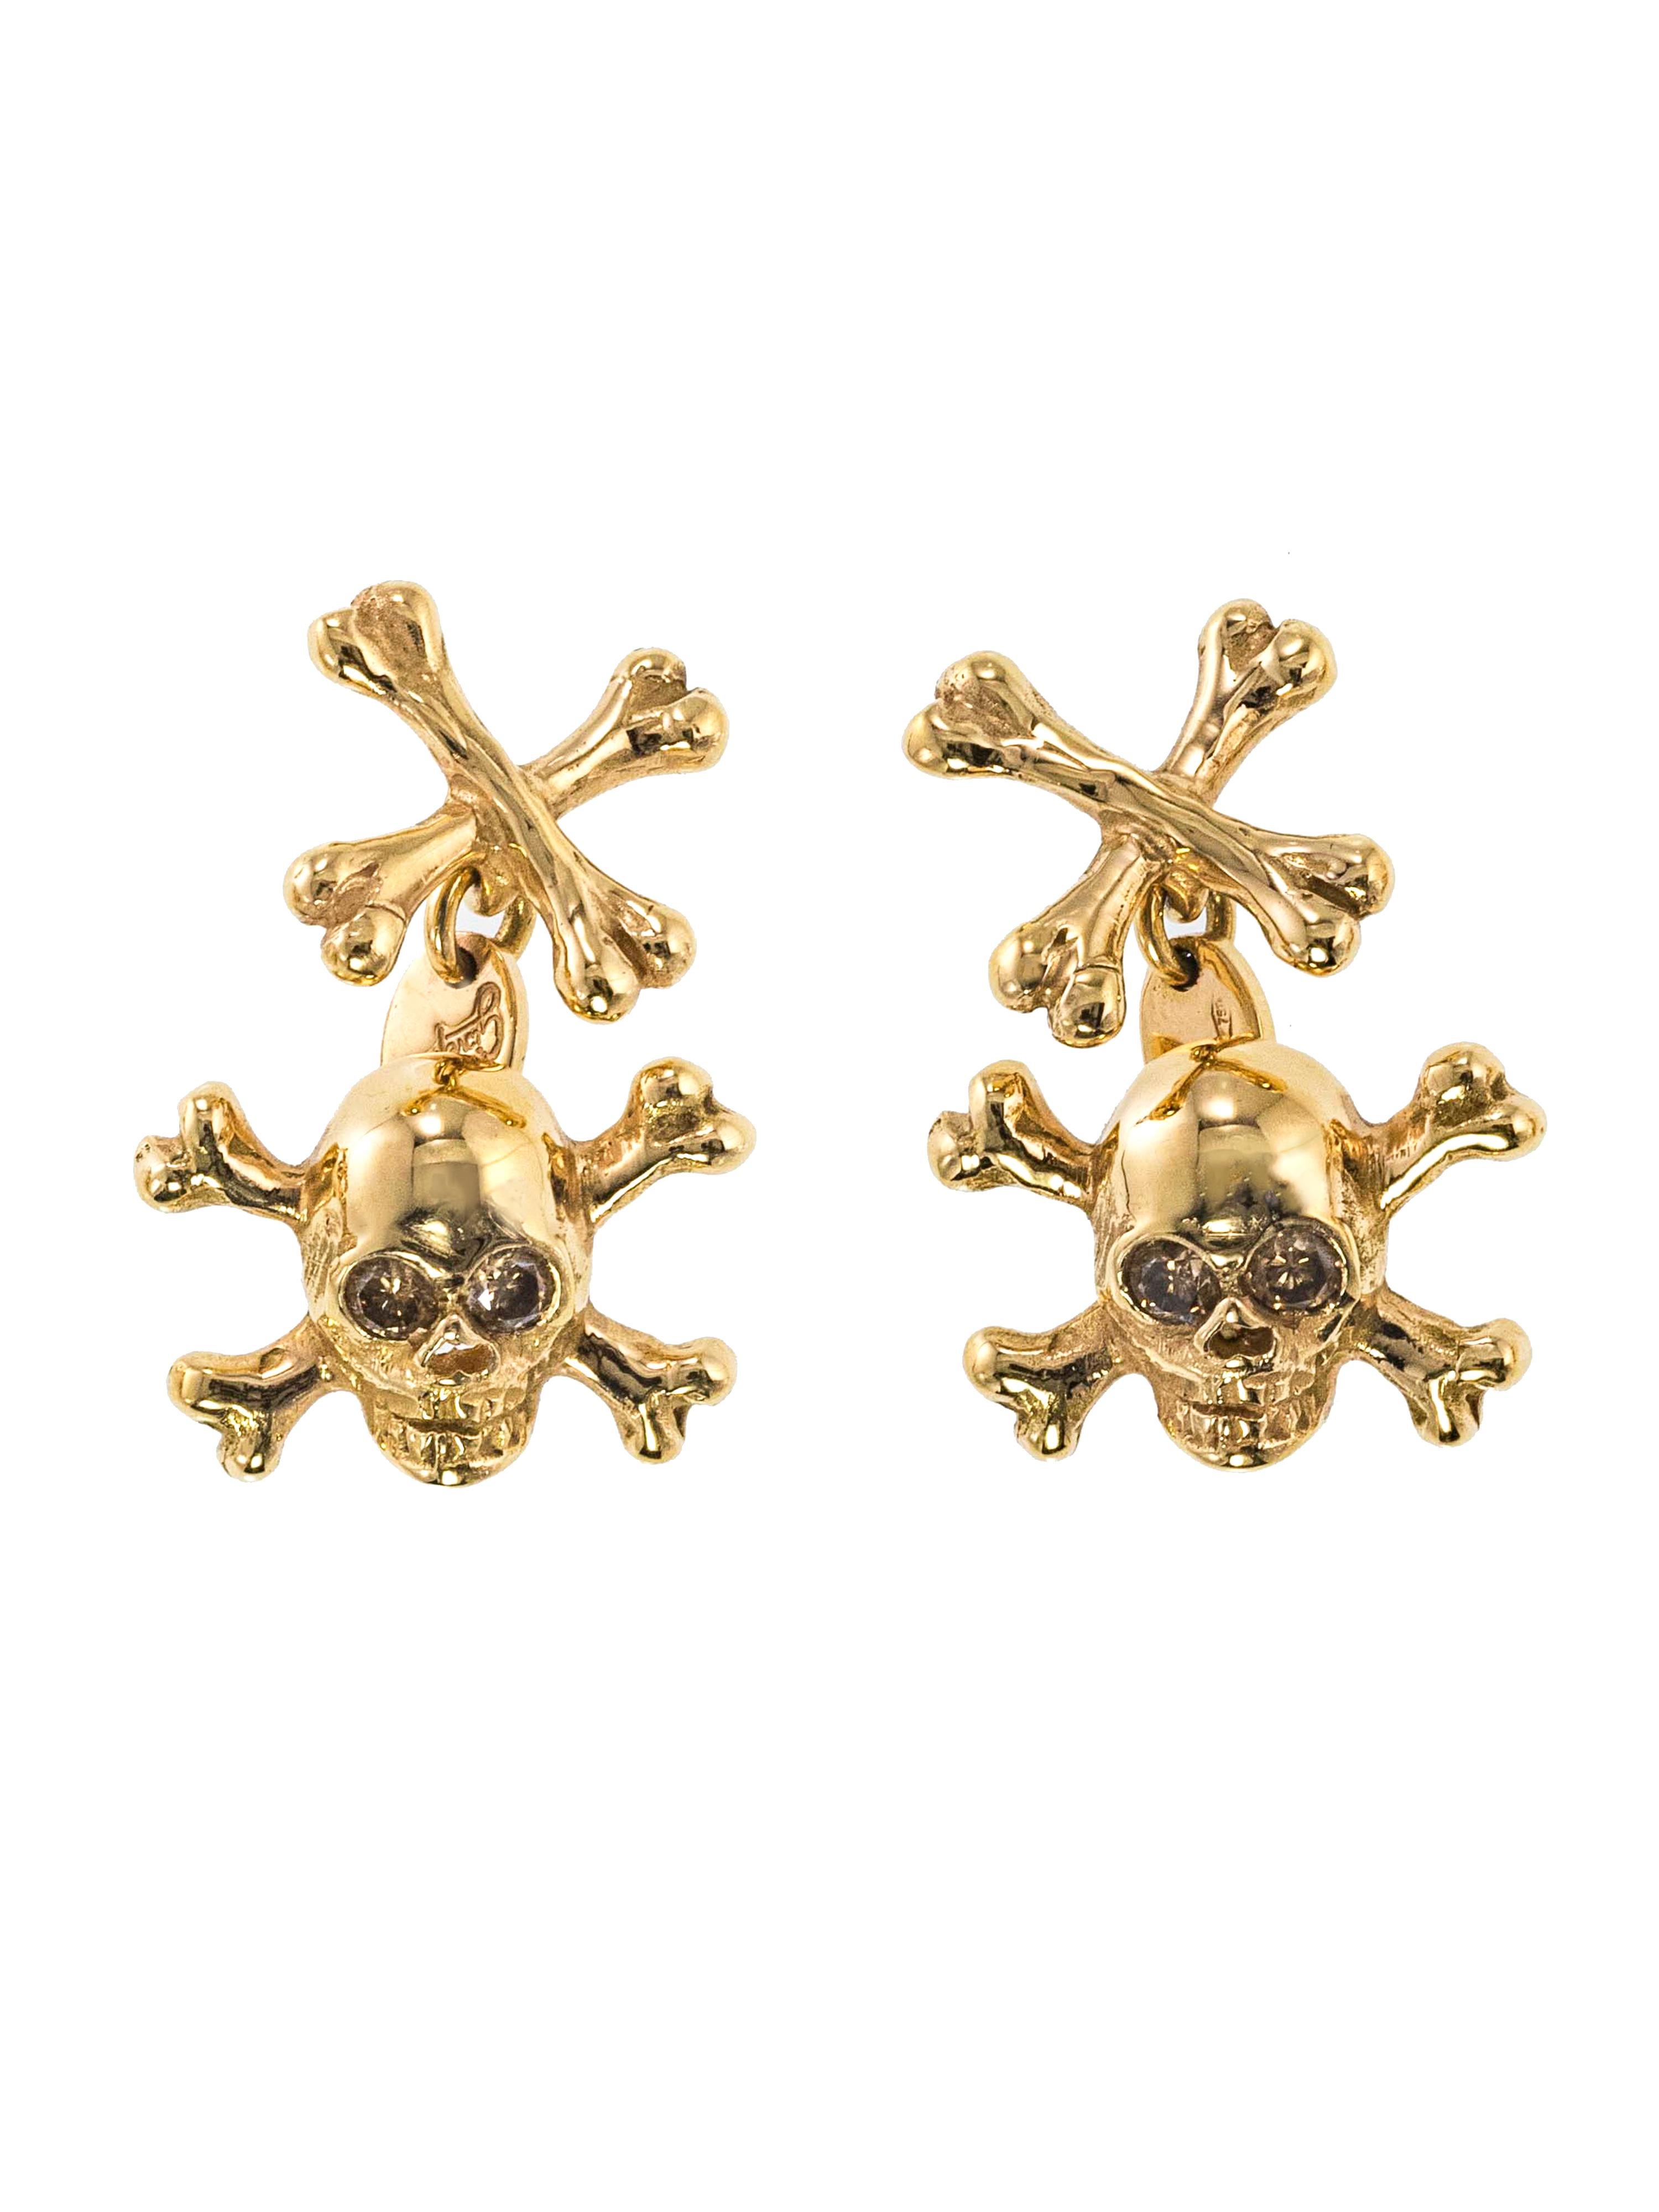 18Kt Pink Gold and Brown Diamonds Skull Cufflinks In New Condition For Sale In Cattolica, IT